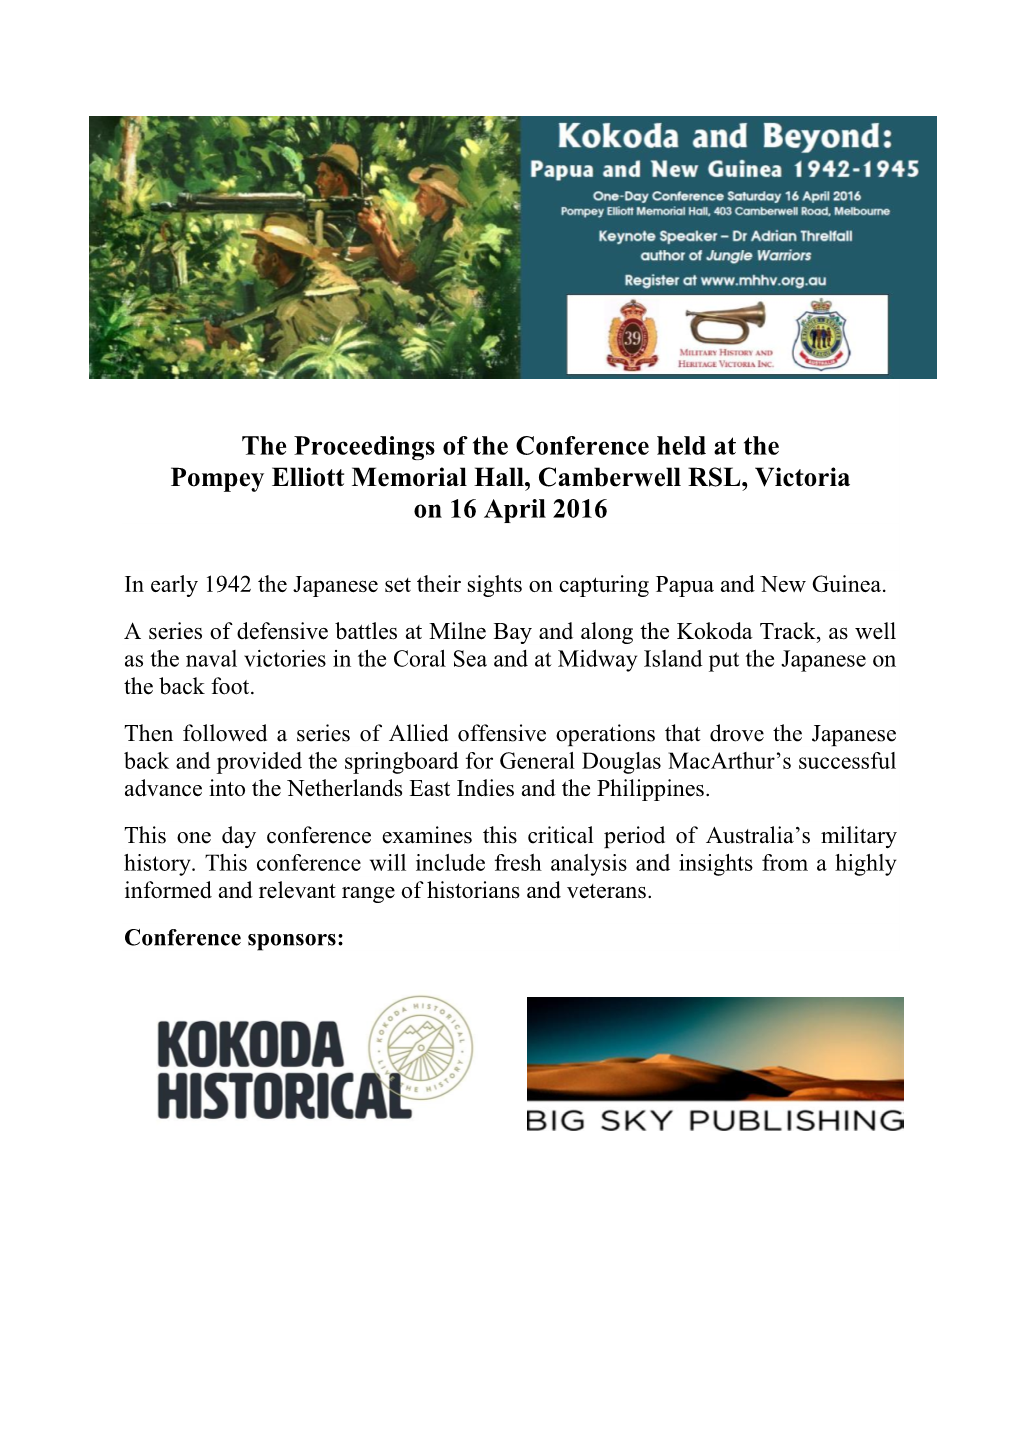 The Proceedings of the Conference Held at the Pompey Elliott Memorial Hall, Camberwell RSL, Victoria on 16 April 2016